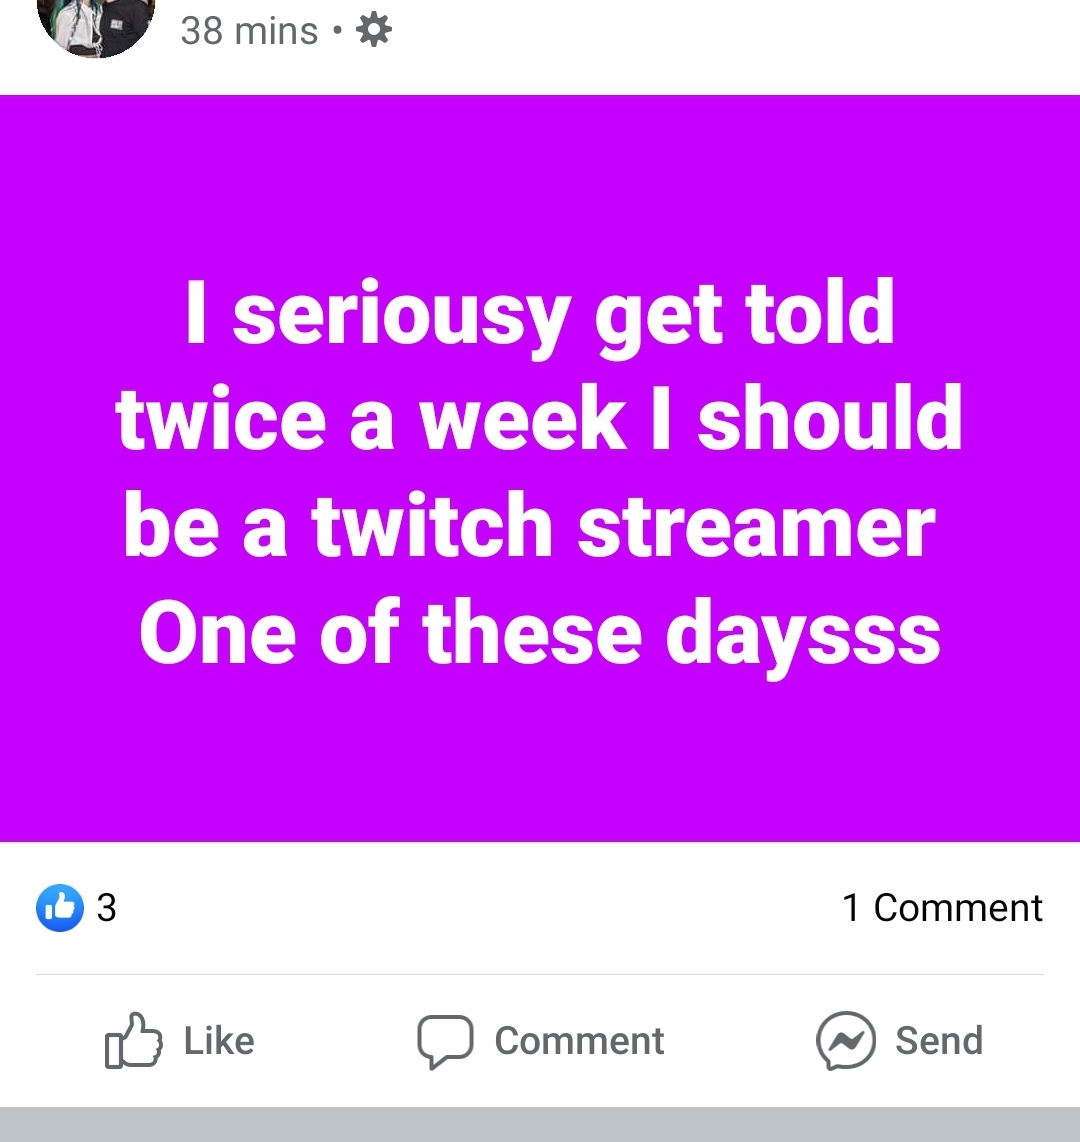 angle - 38 mins I seriousy get told twice a week I should be a twitch streamer One of these daysss 1 Comment D Comment Com nent @ Send